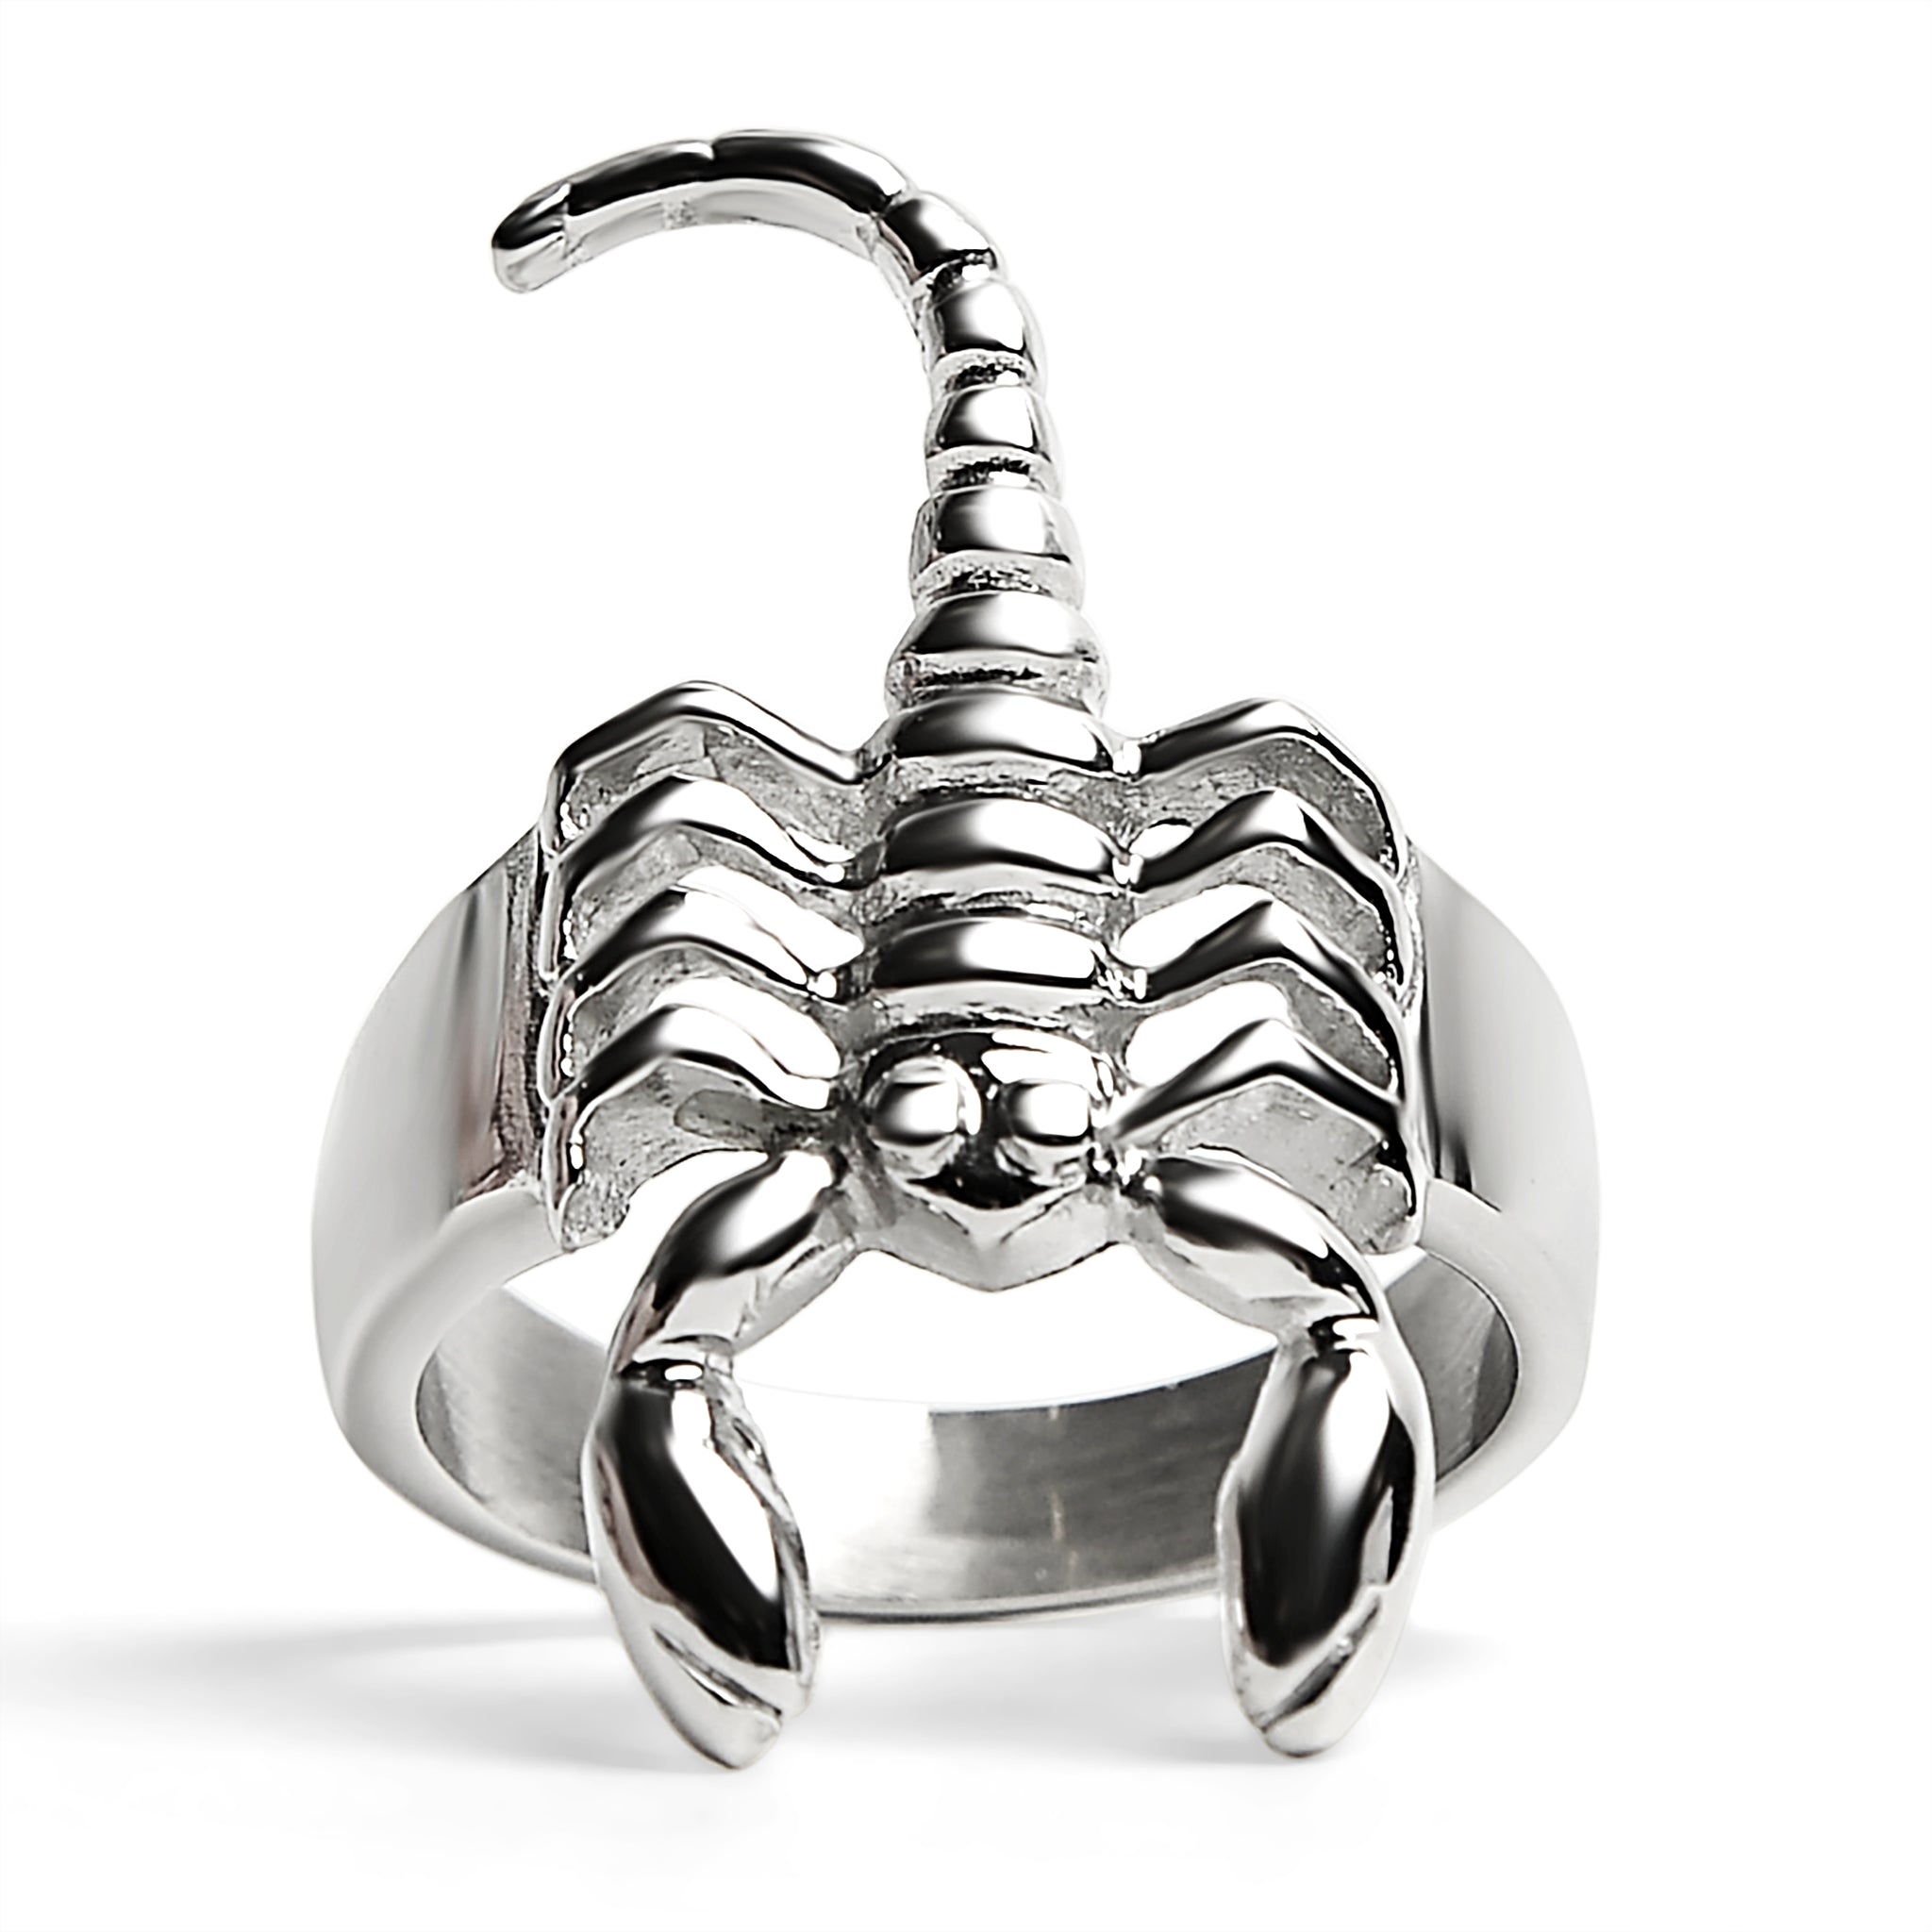 Stainless Steel Scorpion Ring / SCR4058